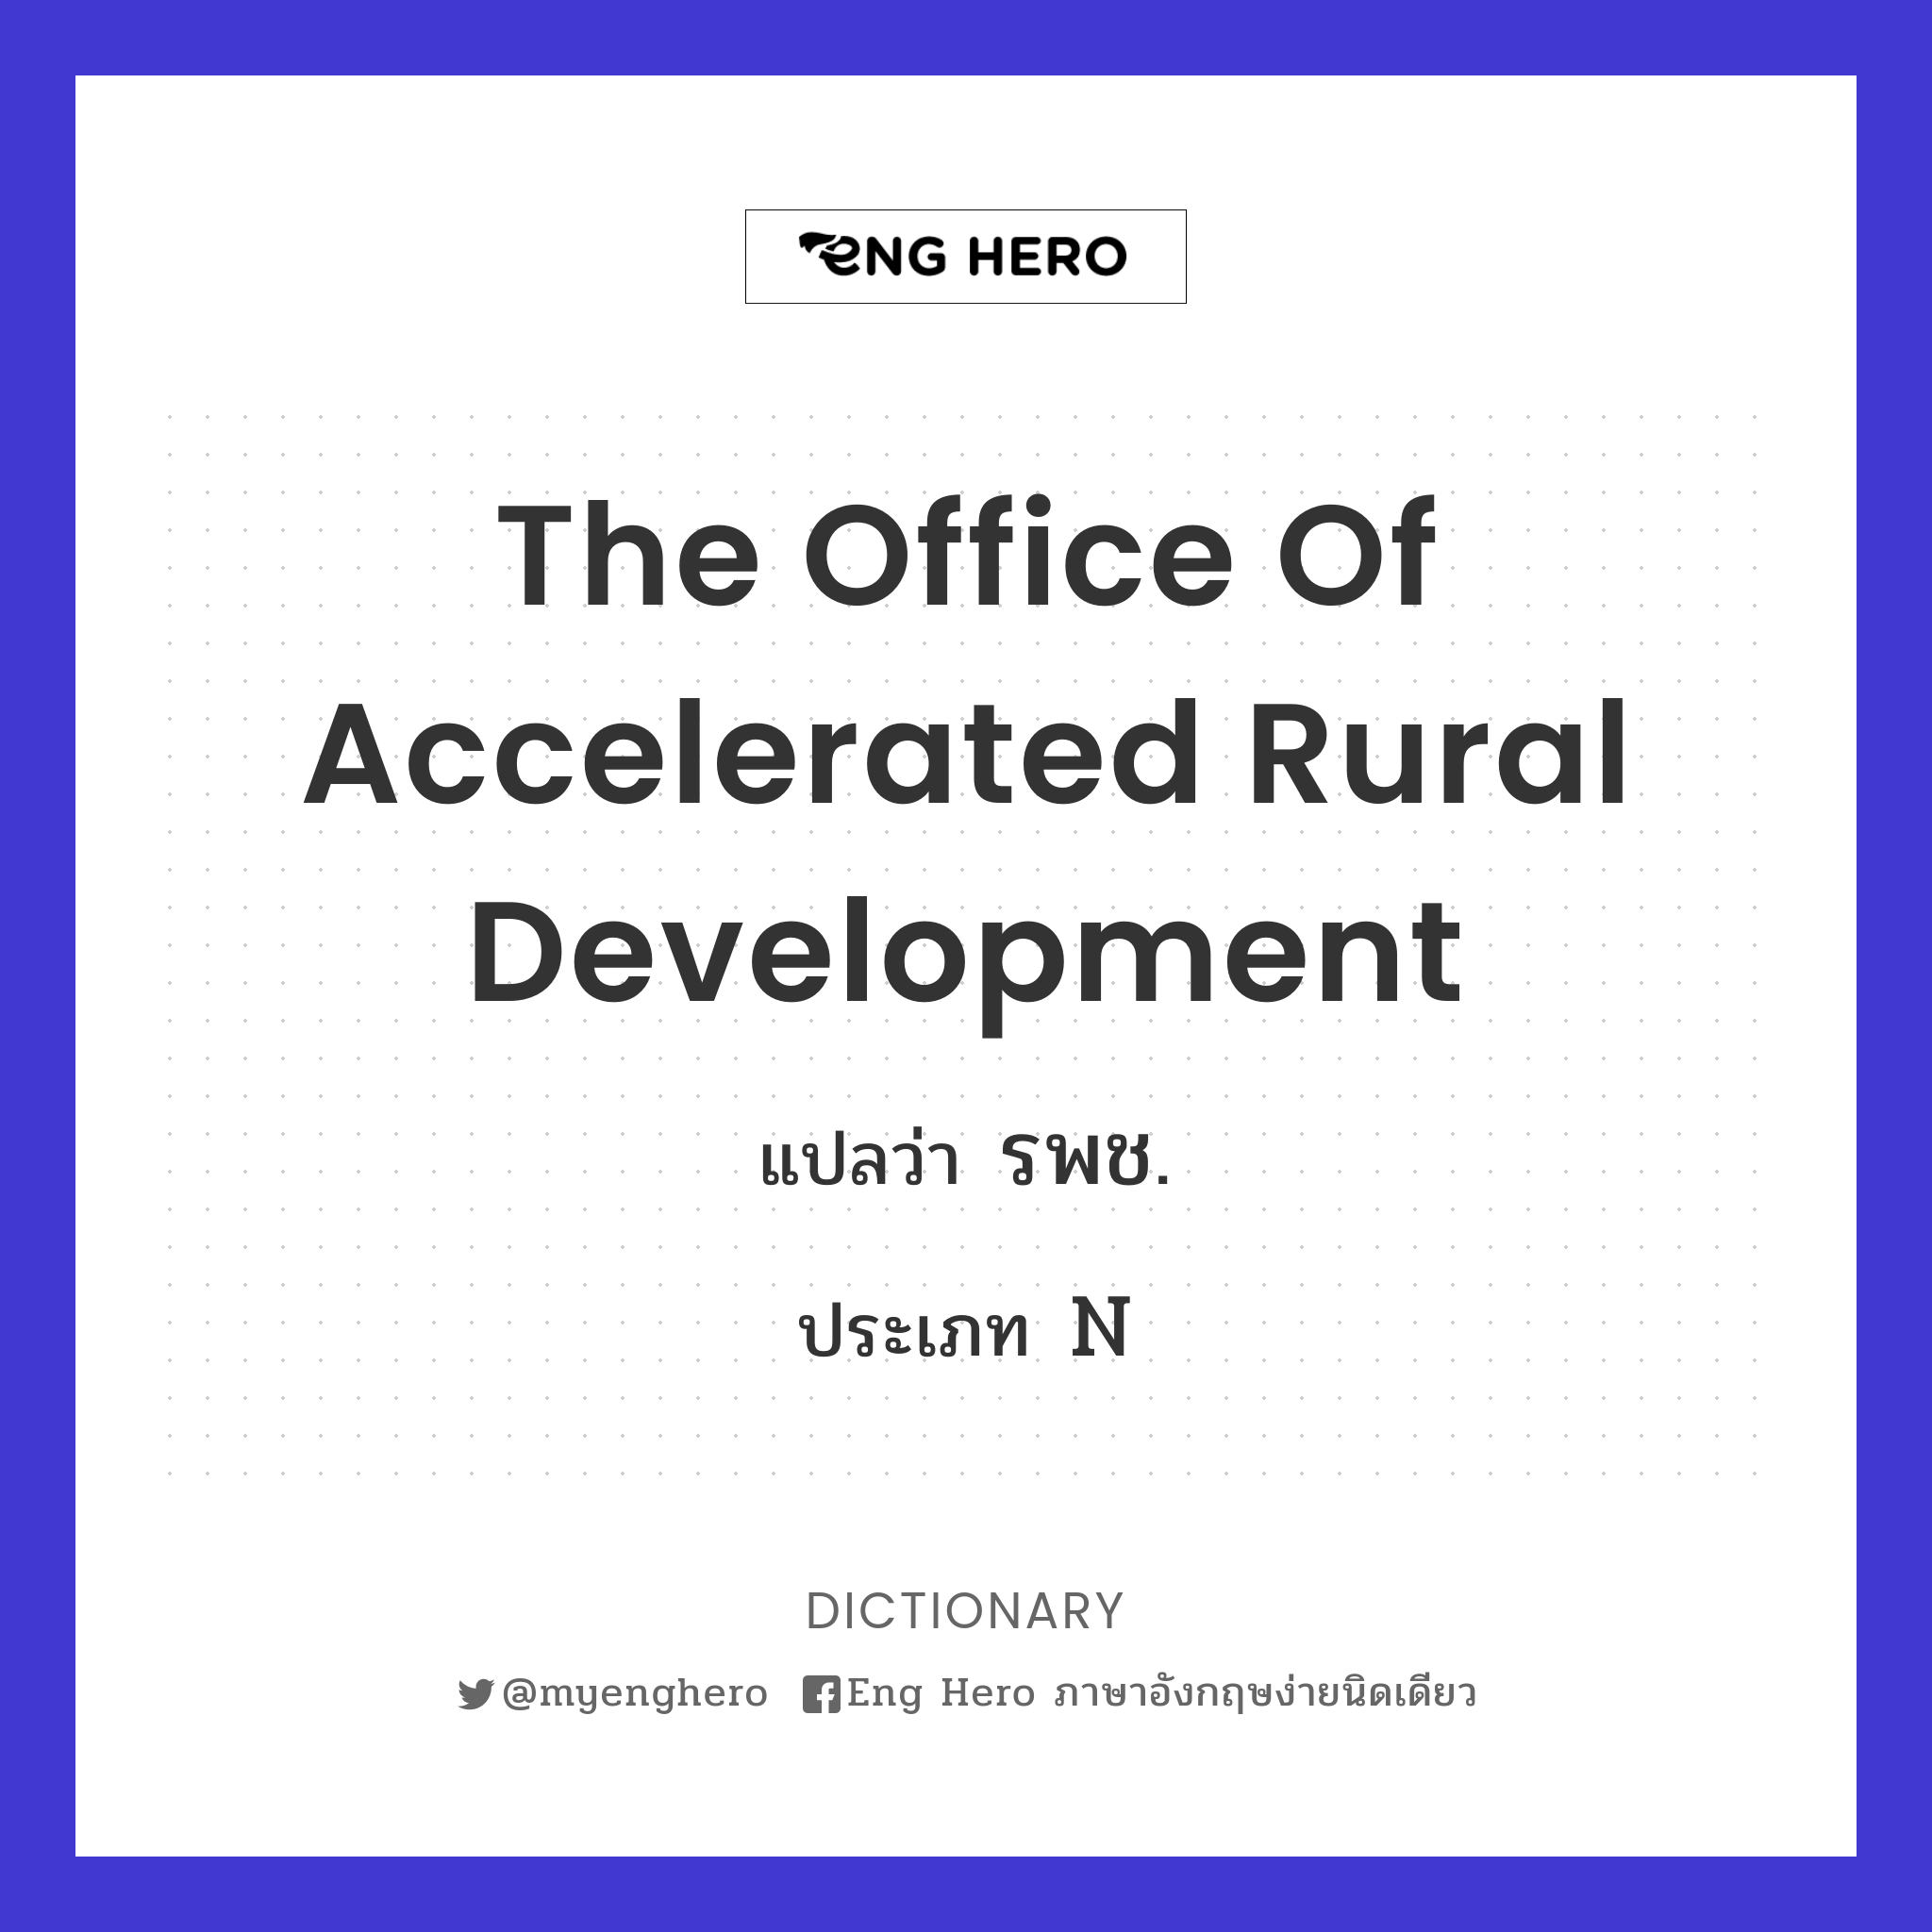 The Office of Accelerated Rural Development